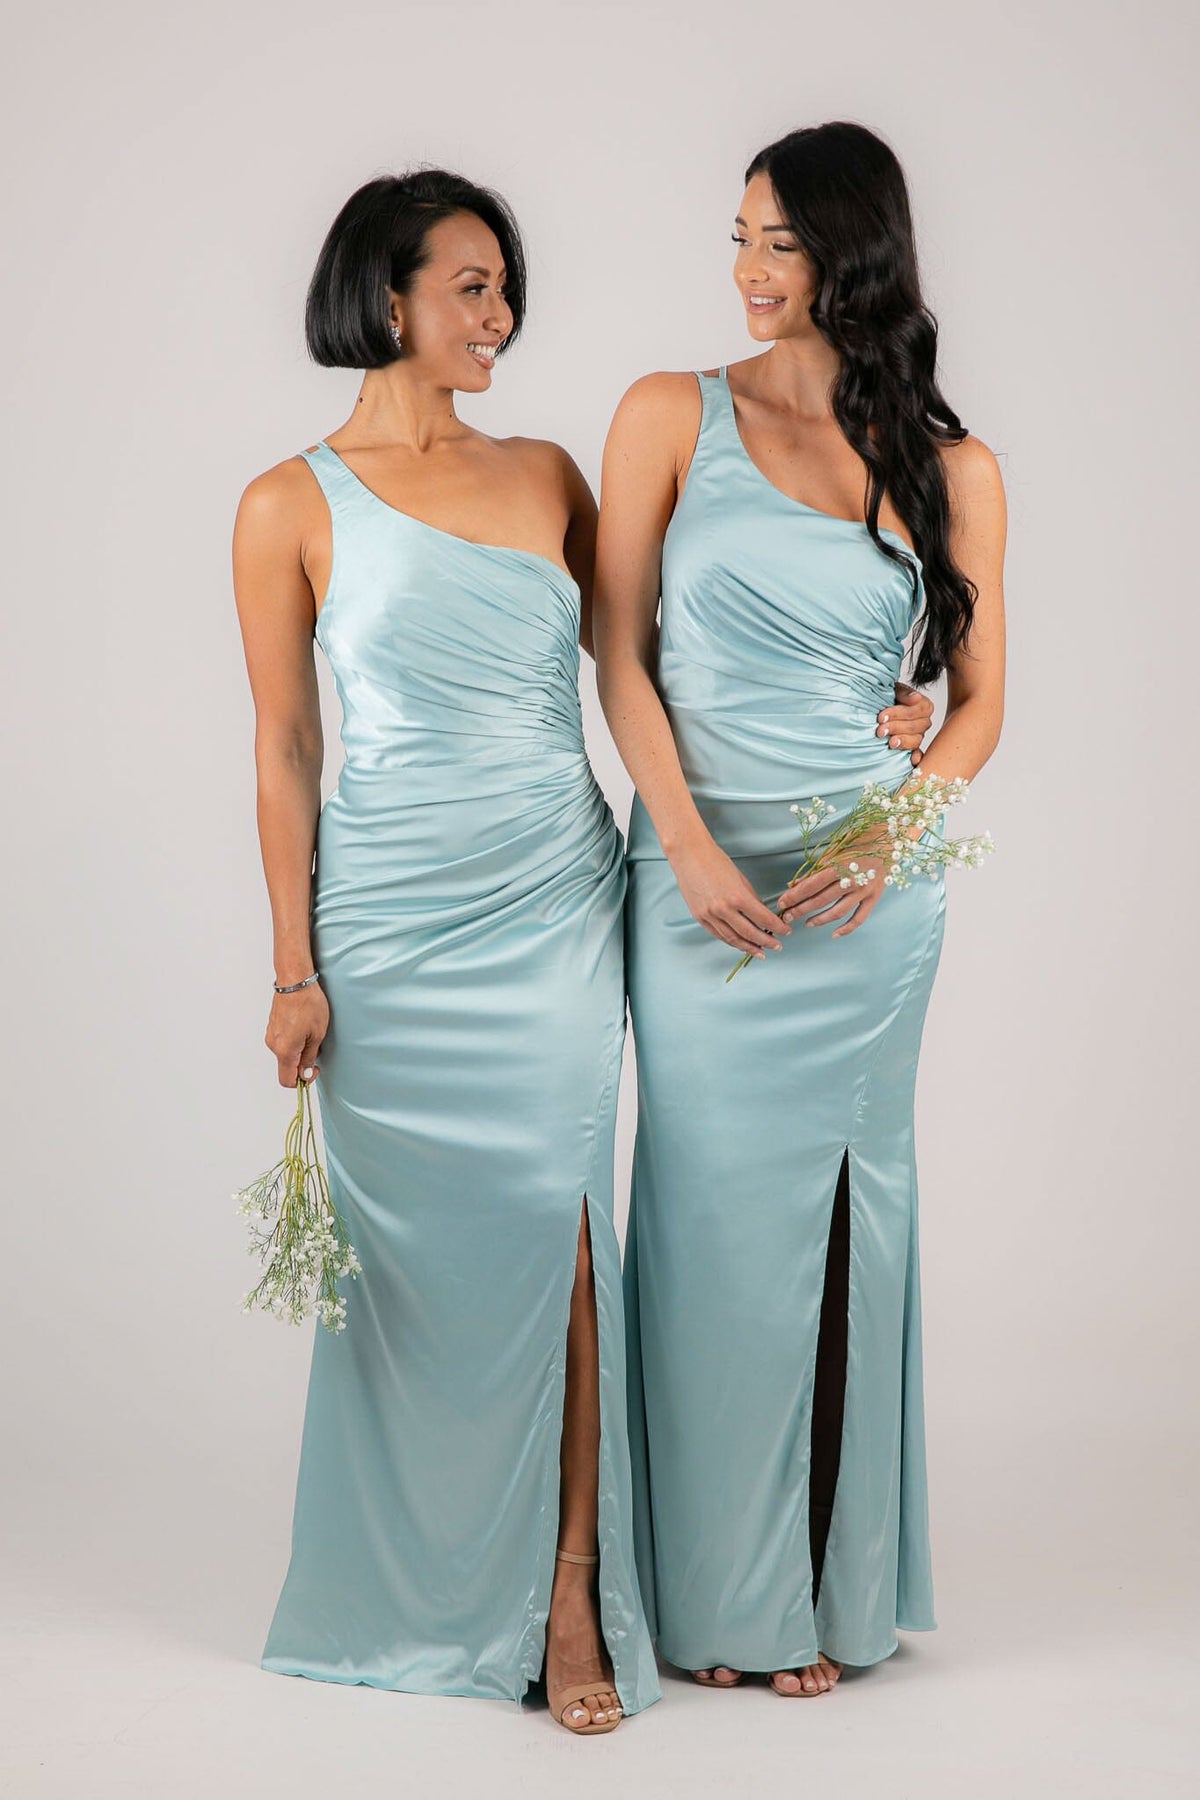 Bridesmaids wearing Light Blue One Shoulder Satin Maxi Dress with Ruched Waist and Leg Slit